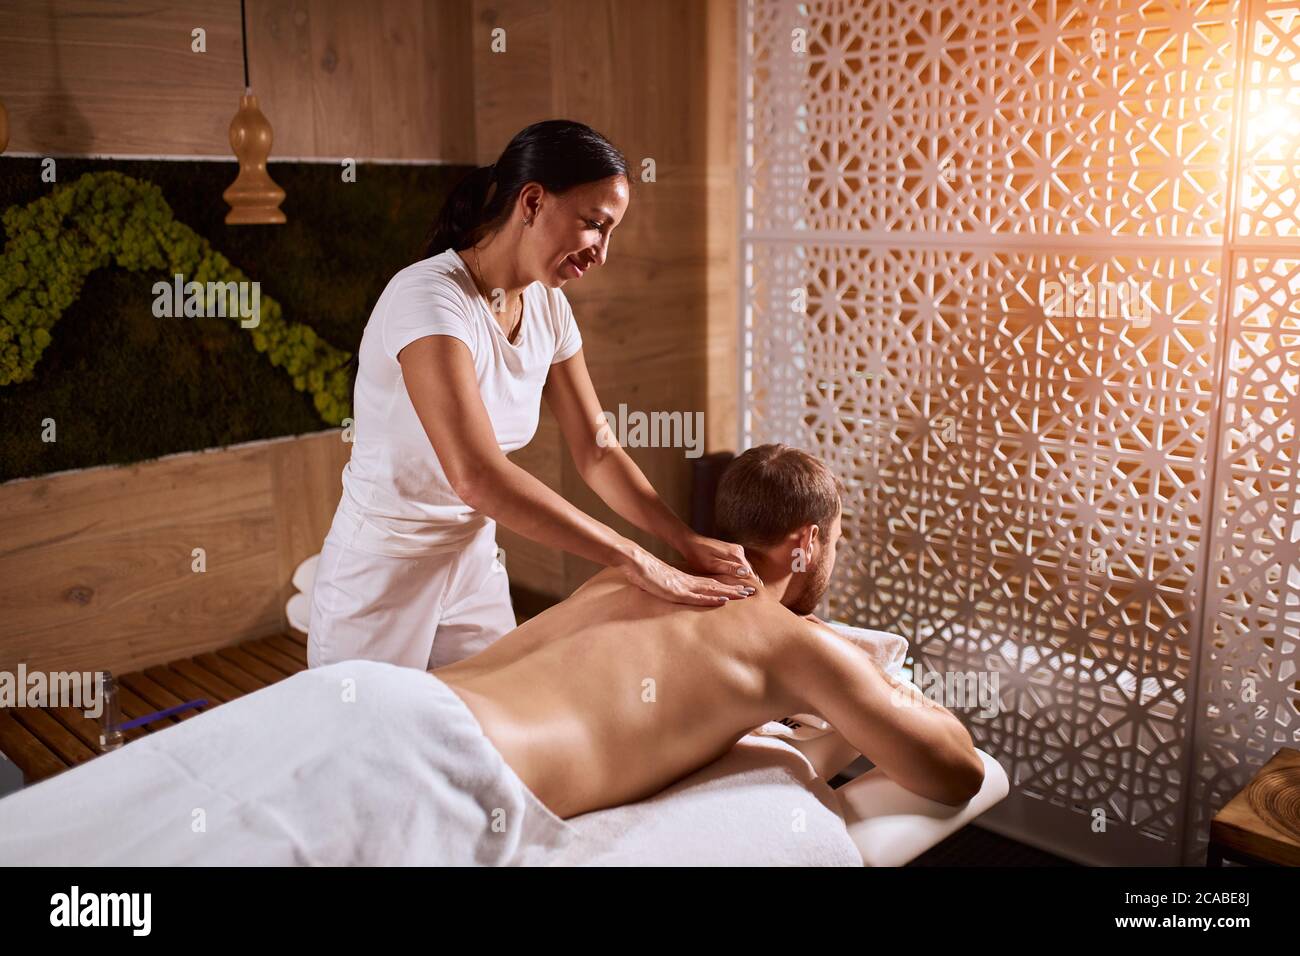 Charming pleasant woman wearing white uniform, working in spa hotel, massaging back of male client in brightly lighted room of hotel, total relaxation Stock Photo